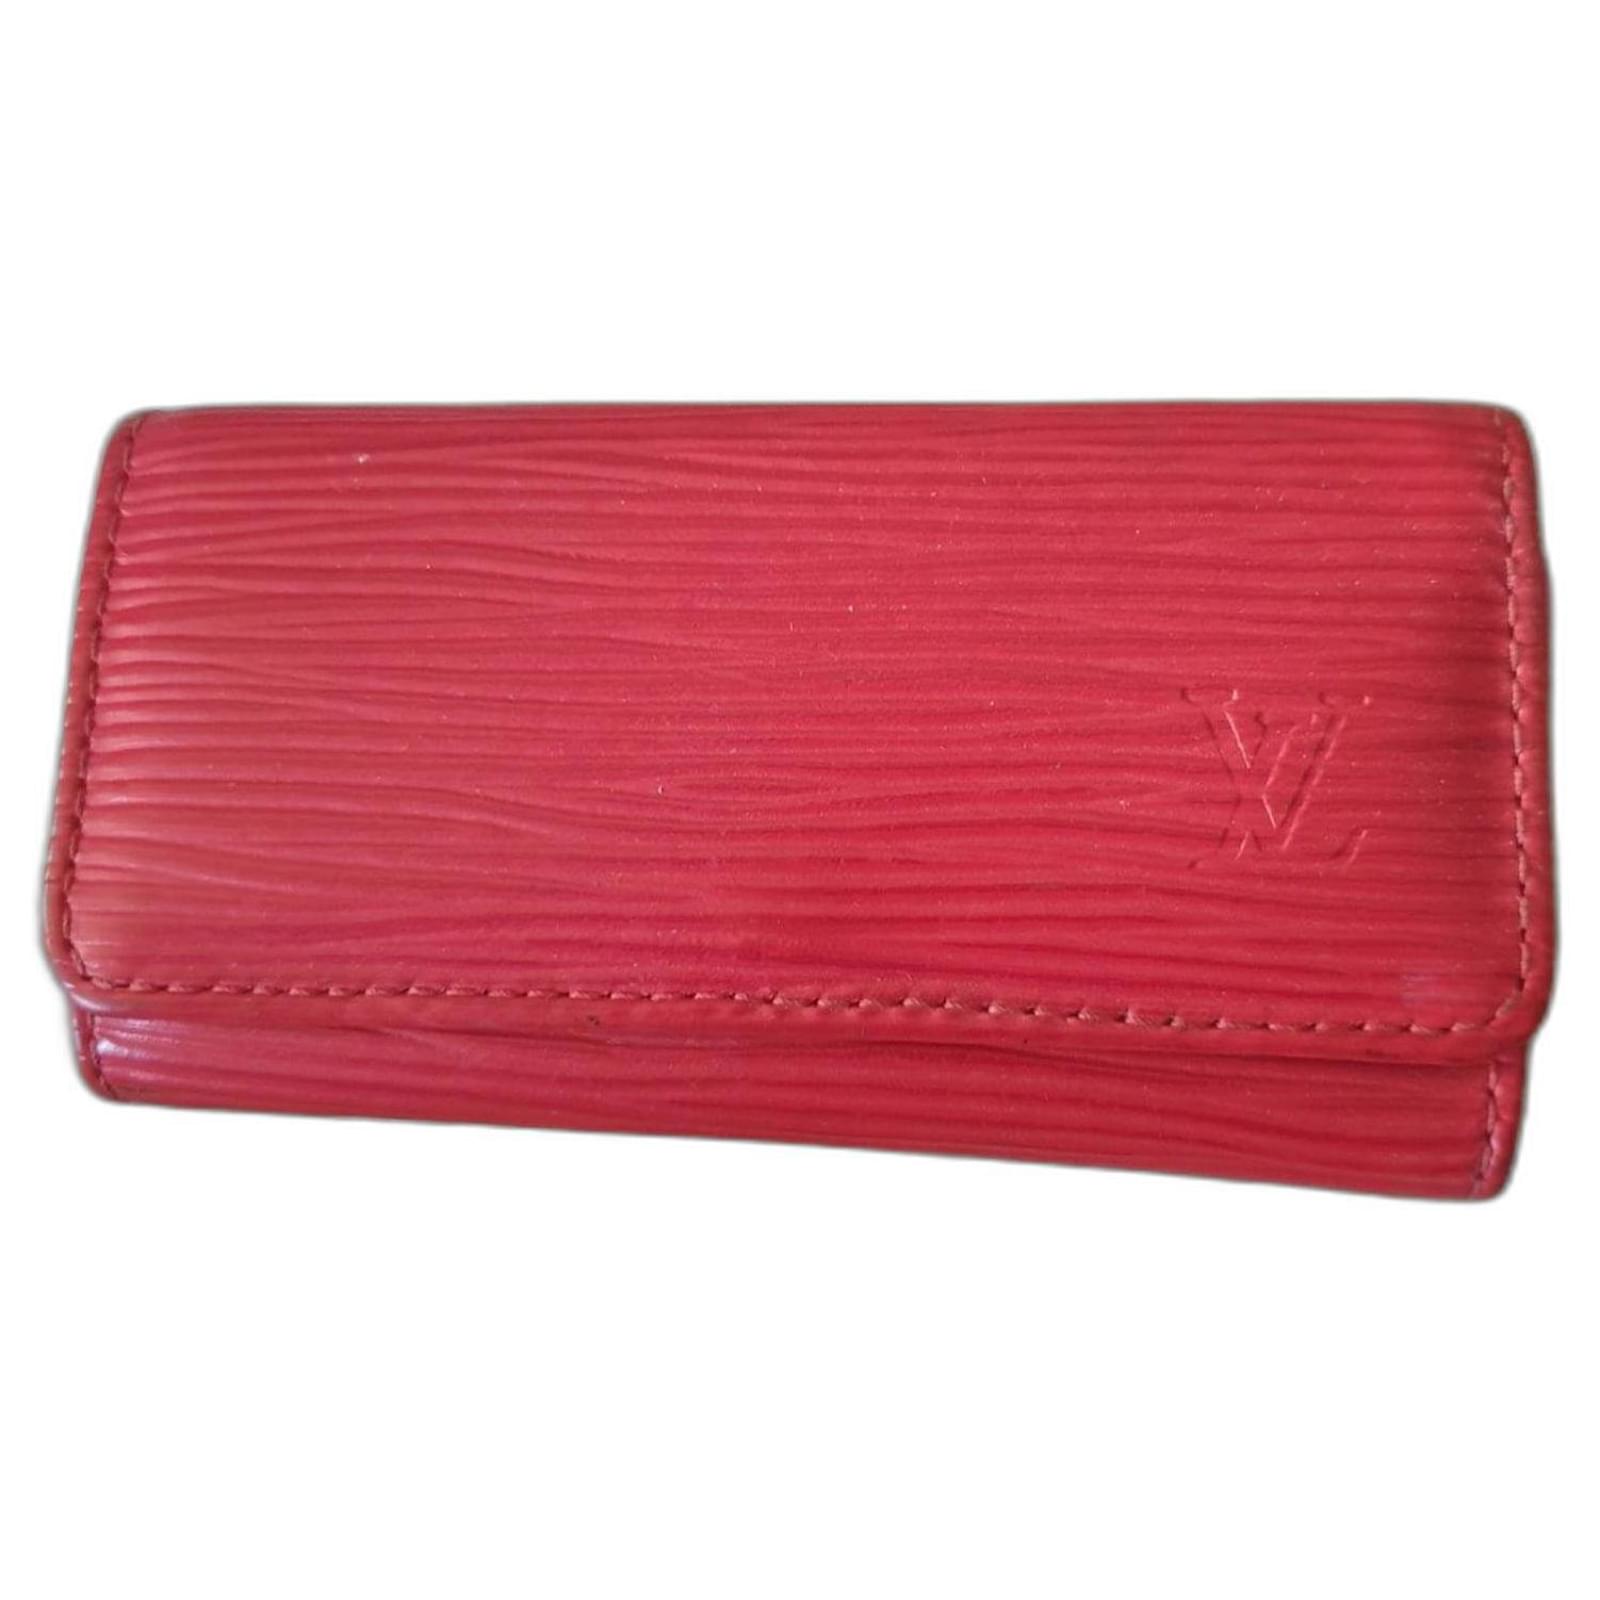 louis vuitton red wallets